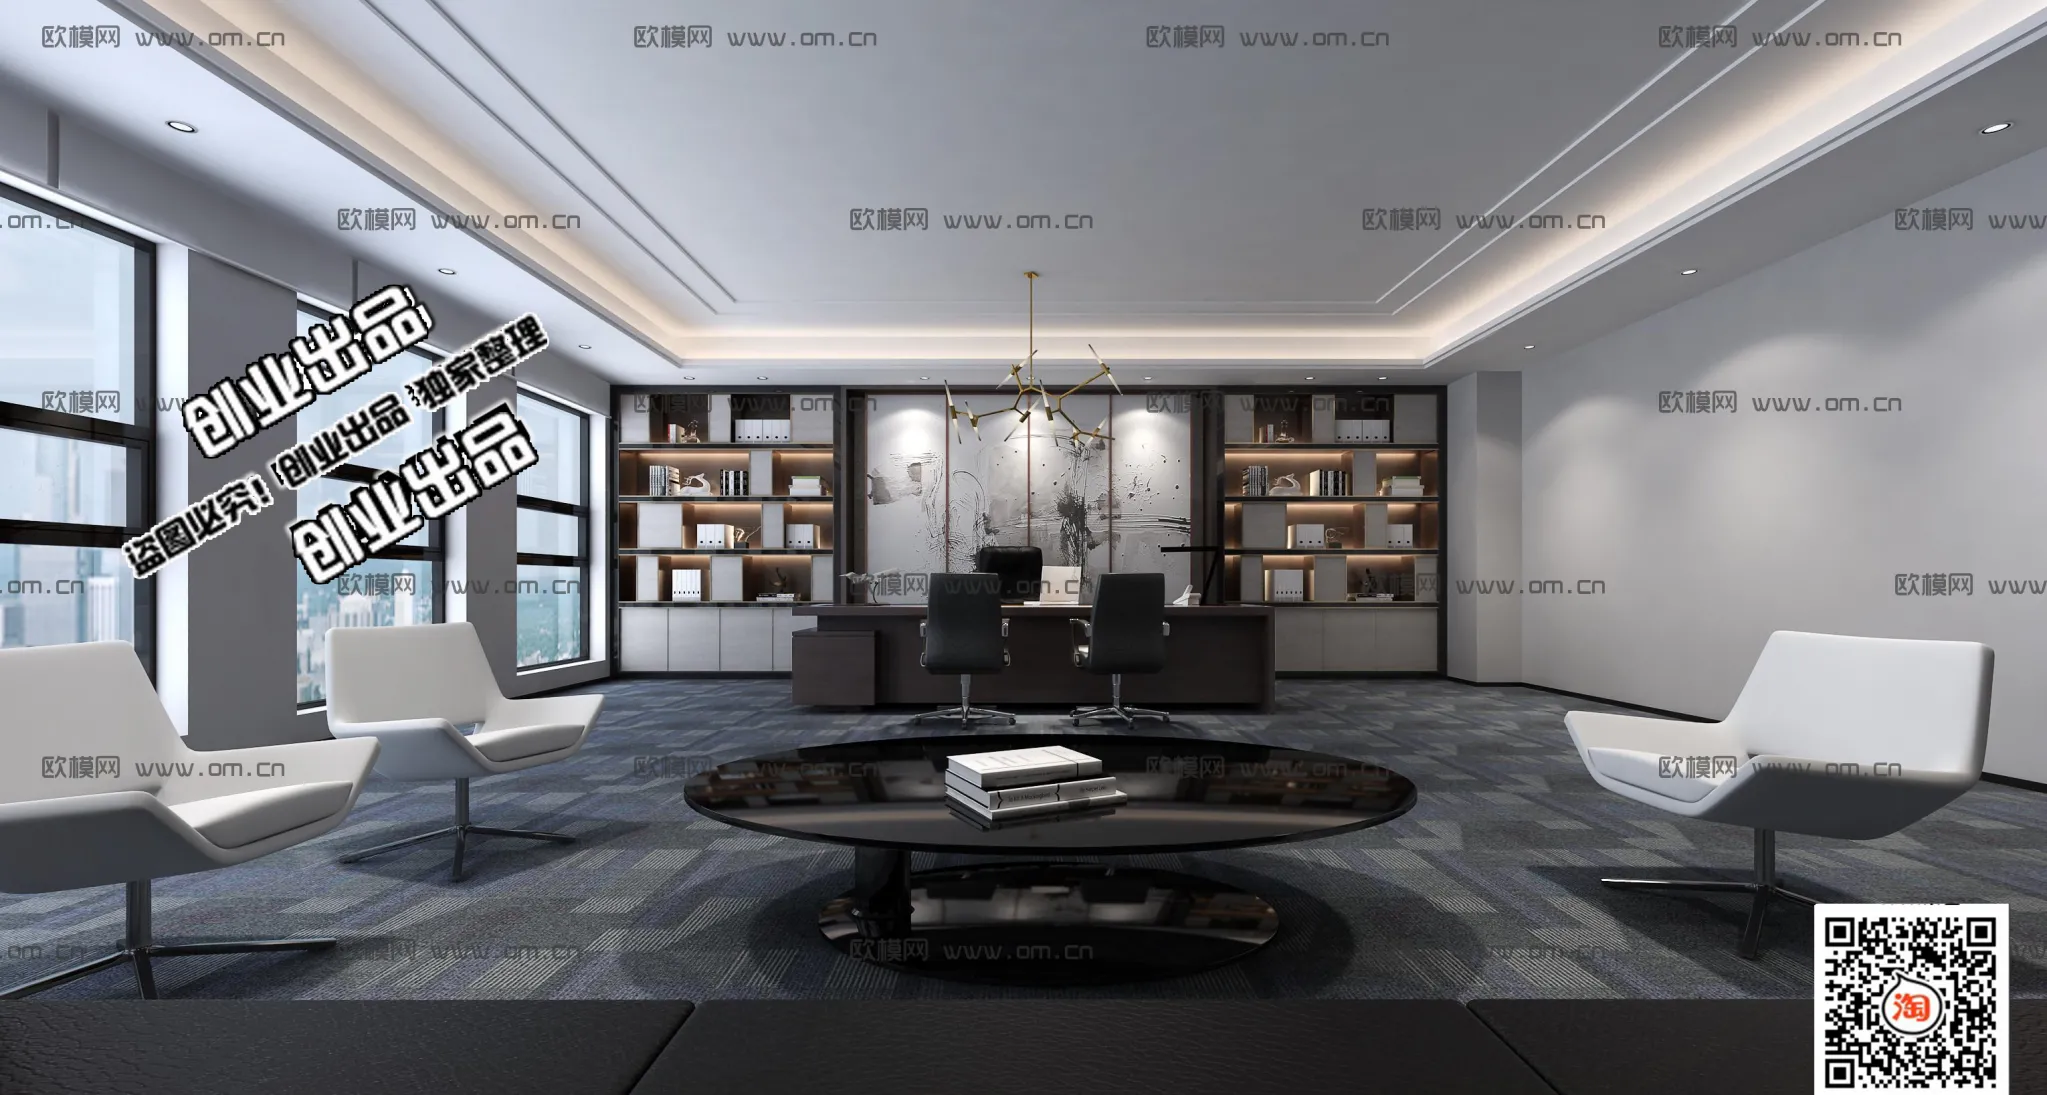 3D OFFICE INTERIOR (VRAY) – MANAGER ROOM 3D SCENES – 039